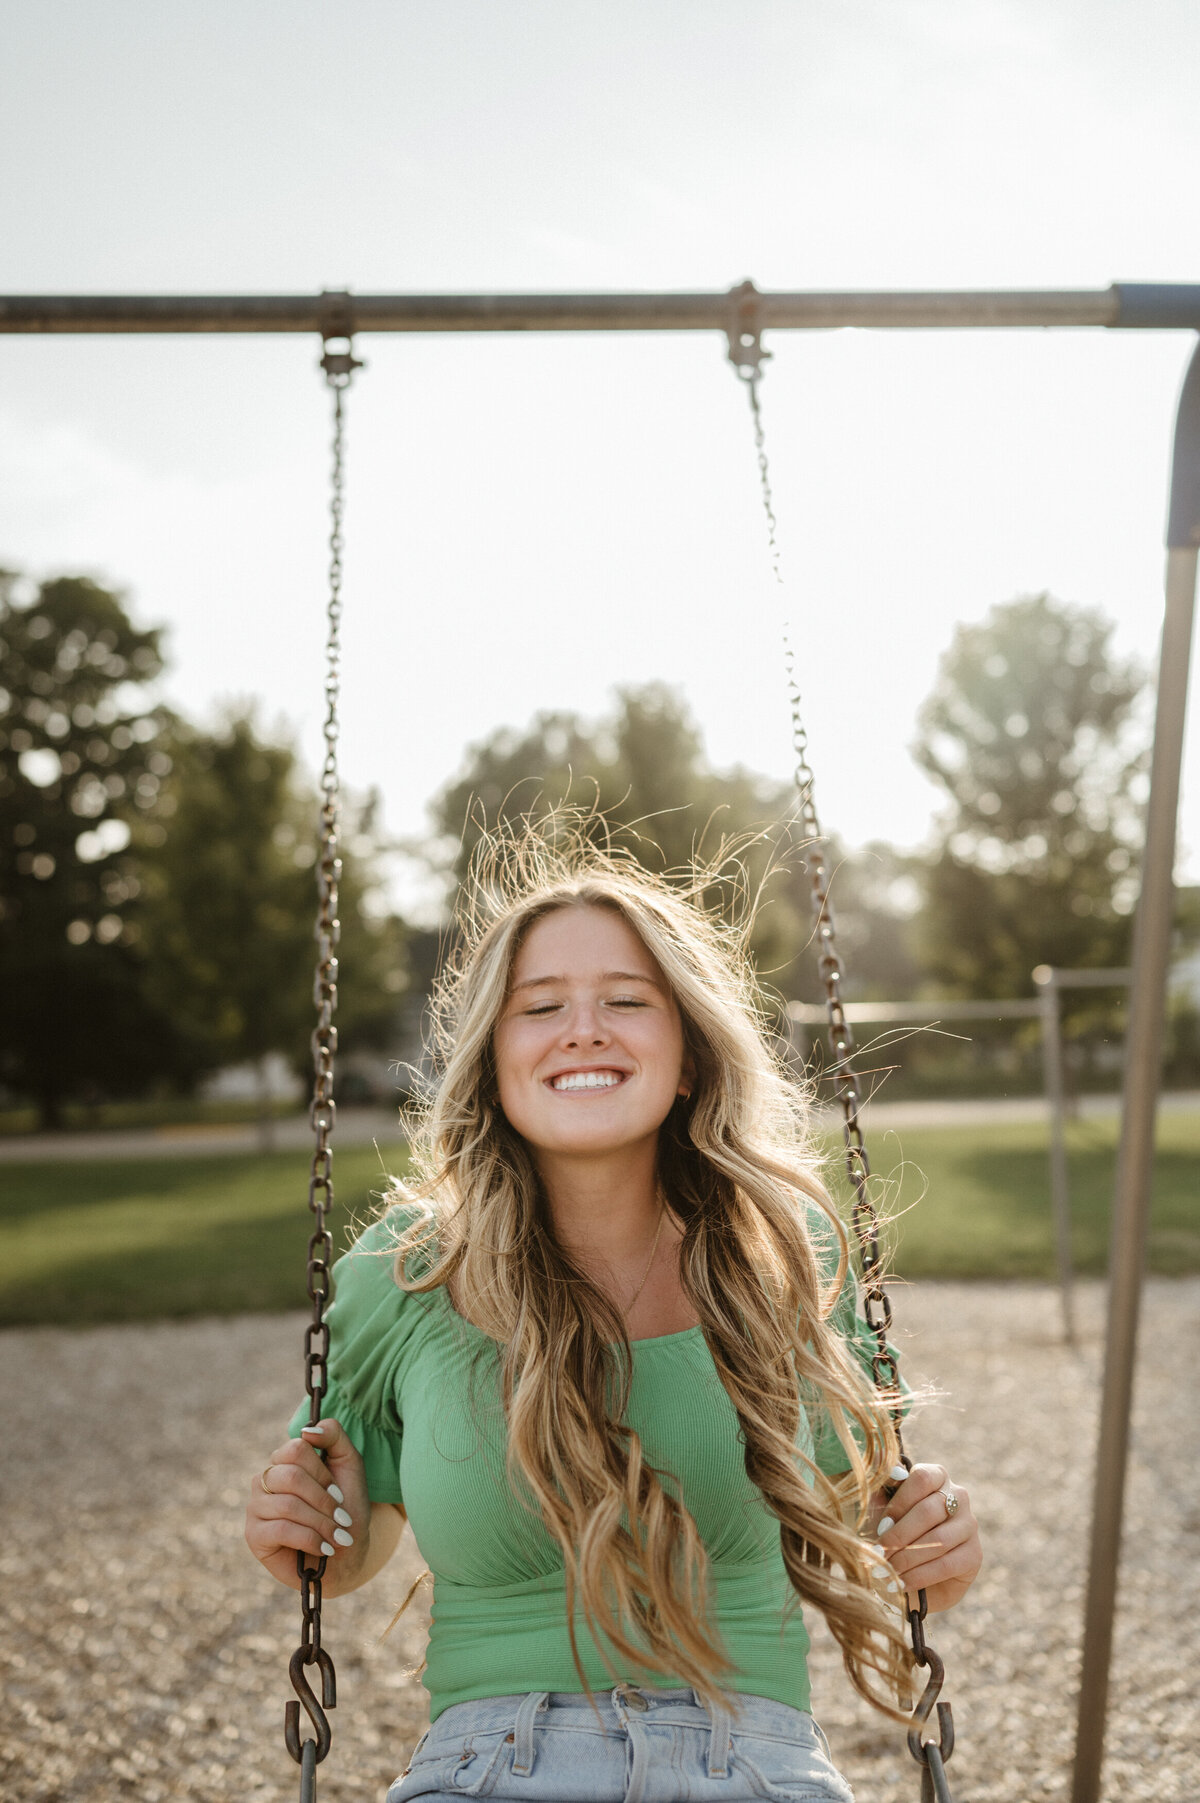 Girl in green shirt on a swing